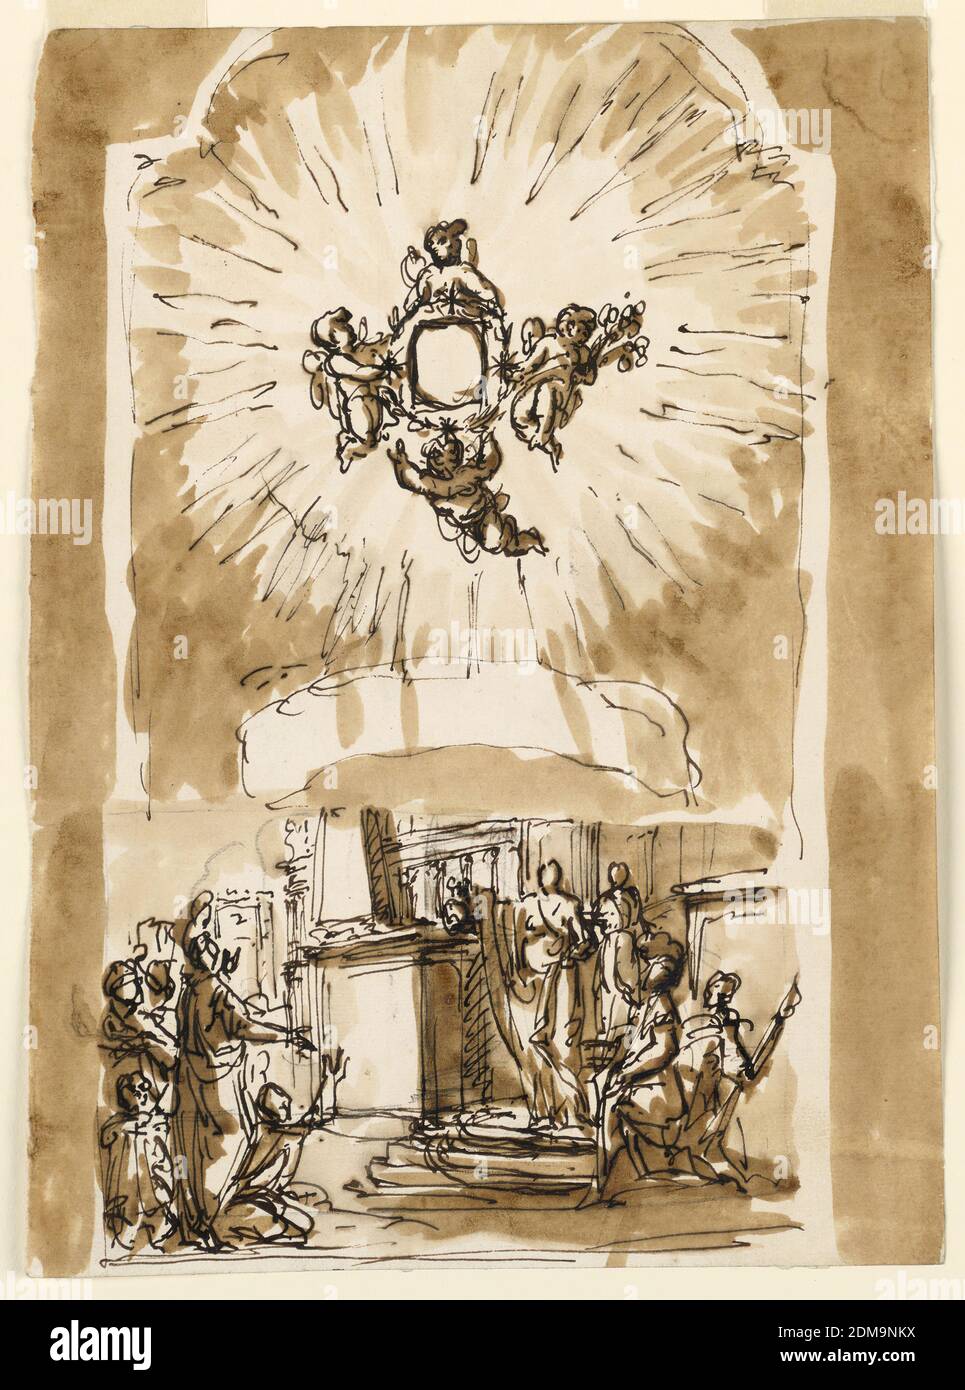 Frame of a revered small painting, Giuseppe Barberi, Italian, 1746–1809, Pen and brown ink, brush and brown wash, graphite, Four flying angels hold a wreath which surrounds the frame of the painting. It forms the center of a glory of rays beneath which is a paper scroll. Beneath, a woman in classical attire is shown putting upon or talking from a pedestal a pitcher. A crowd implores, or thanks her. Architectural setting, the upper part of which is not shown. Colored background., Rome, Italy, ca. 1773–1774, architecture, Drawing Stock Photo